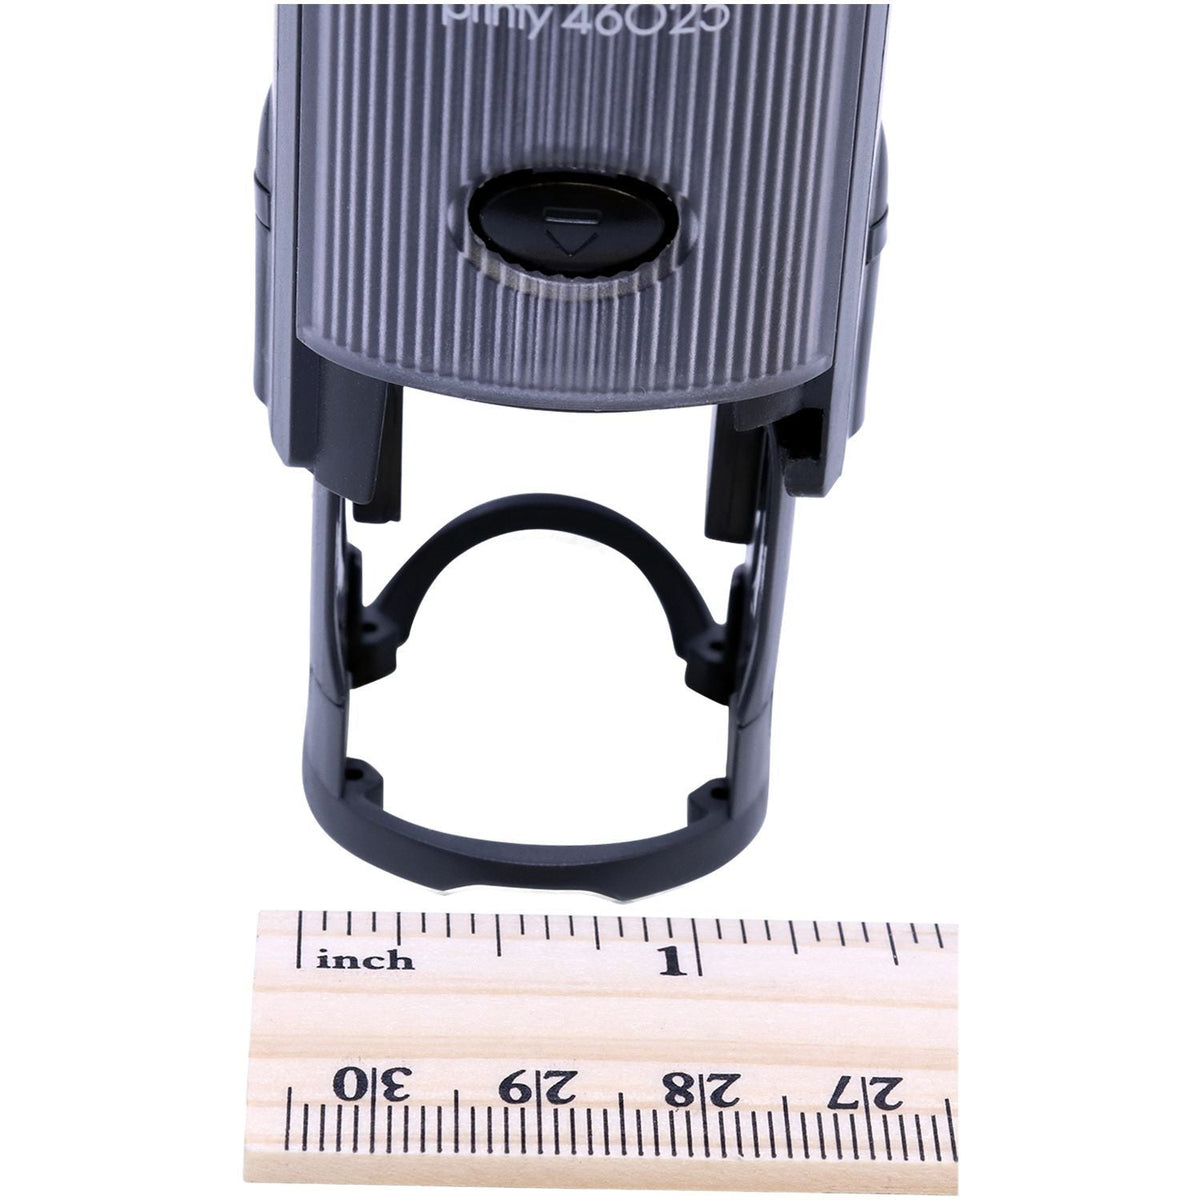 Measurment of Self-Inking Round Happy Face Stamp with Ruler